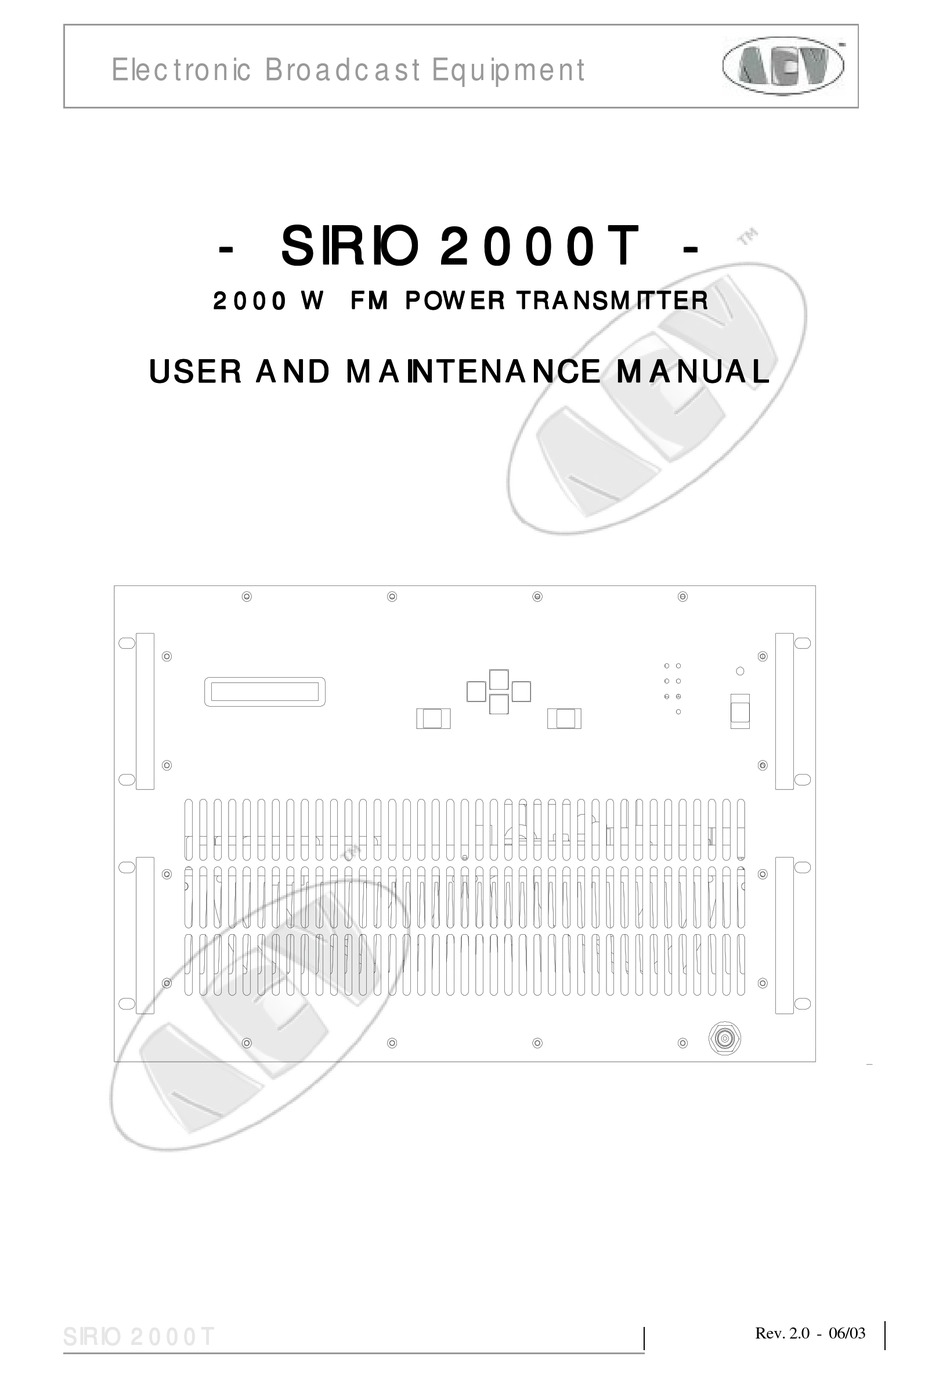 ELECTRONIC BROADCAST EQUIPMENT SIRIO 2000T USER AND MAINTENANCE MANUAL ...